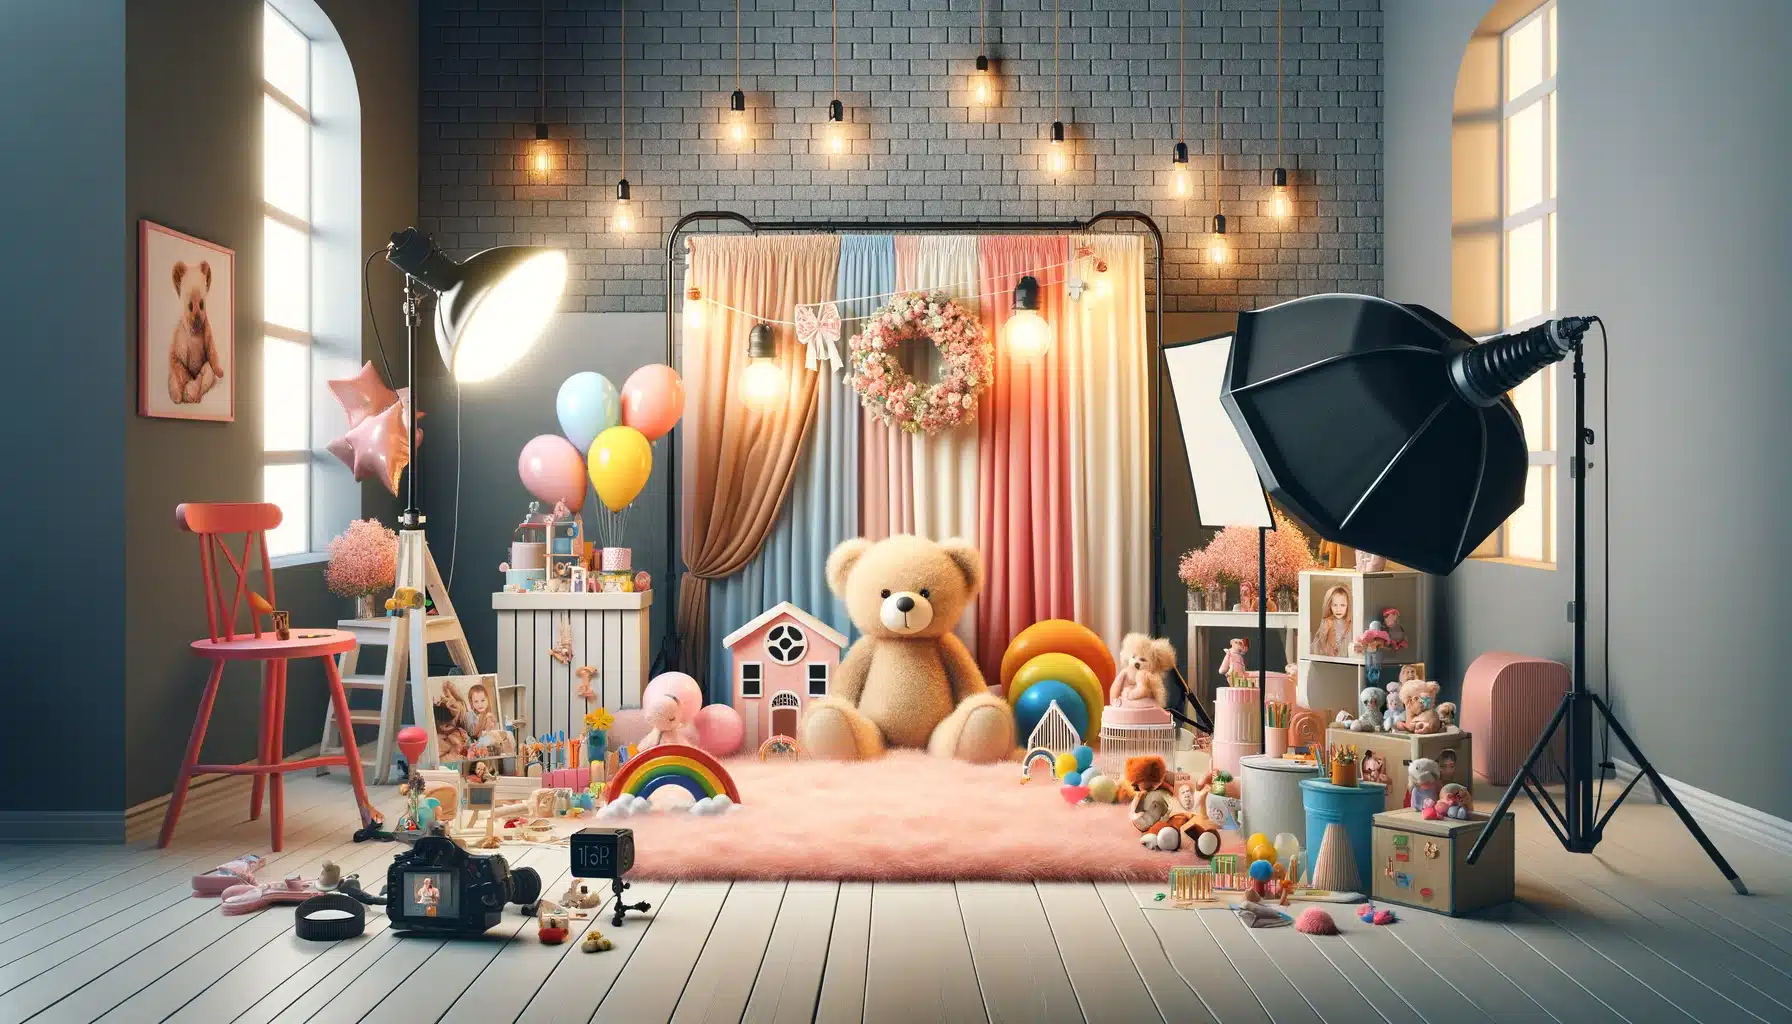 Photography studio setup tailored for child photography with playful props and whimsical backdrop.